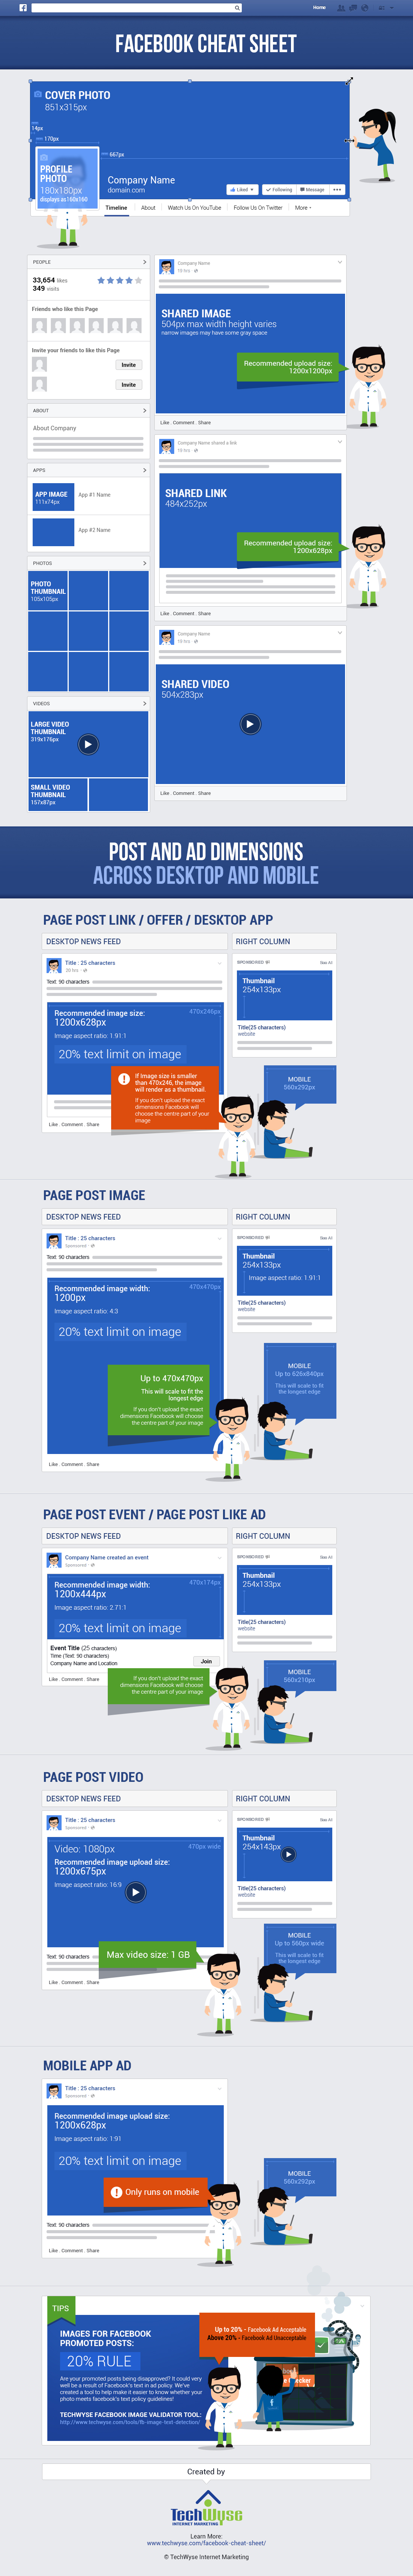 facebook-cheat-sheet-size-and-dimensions